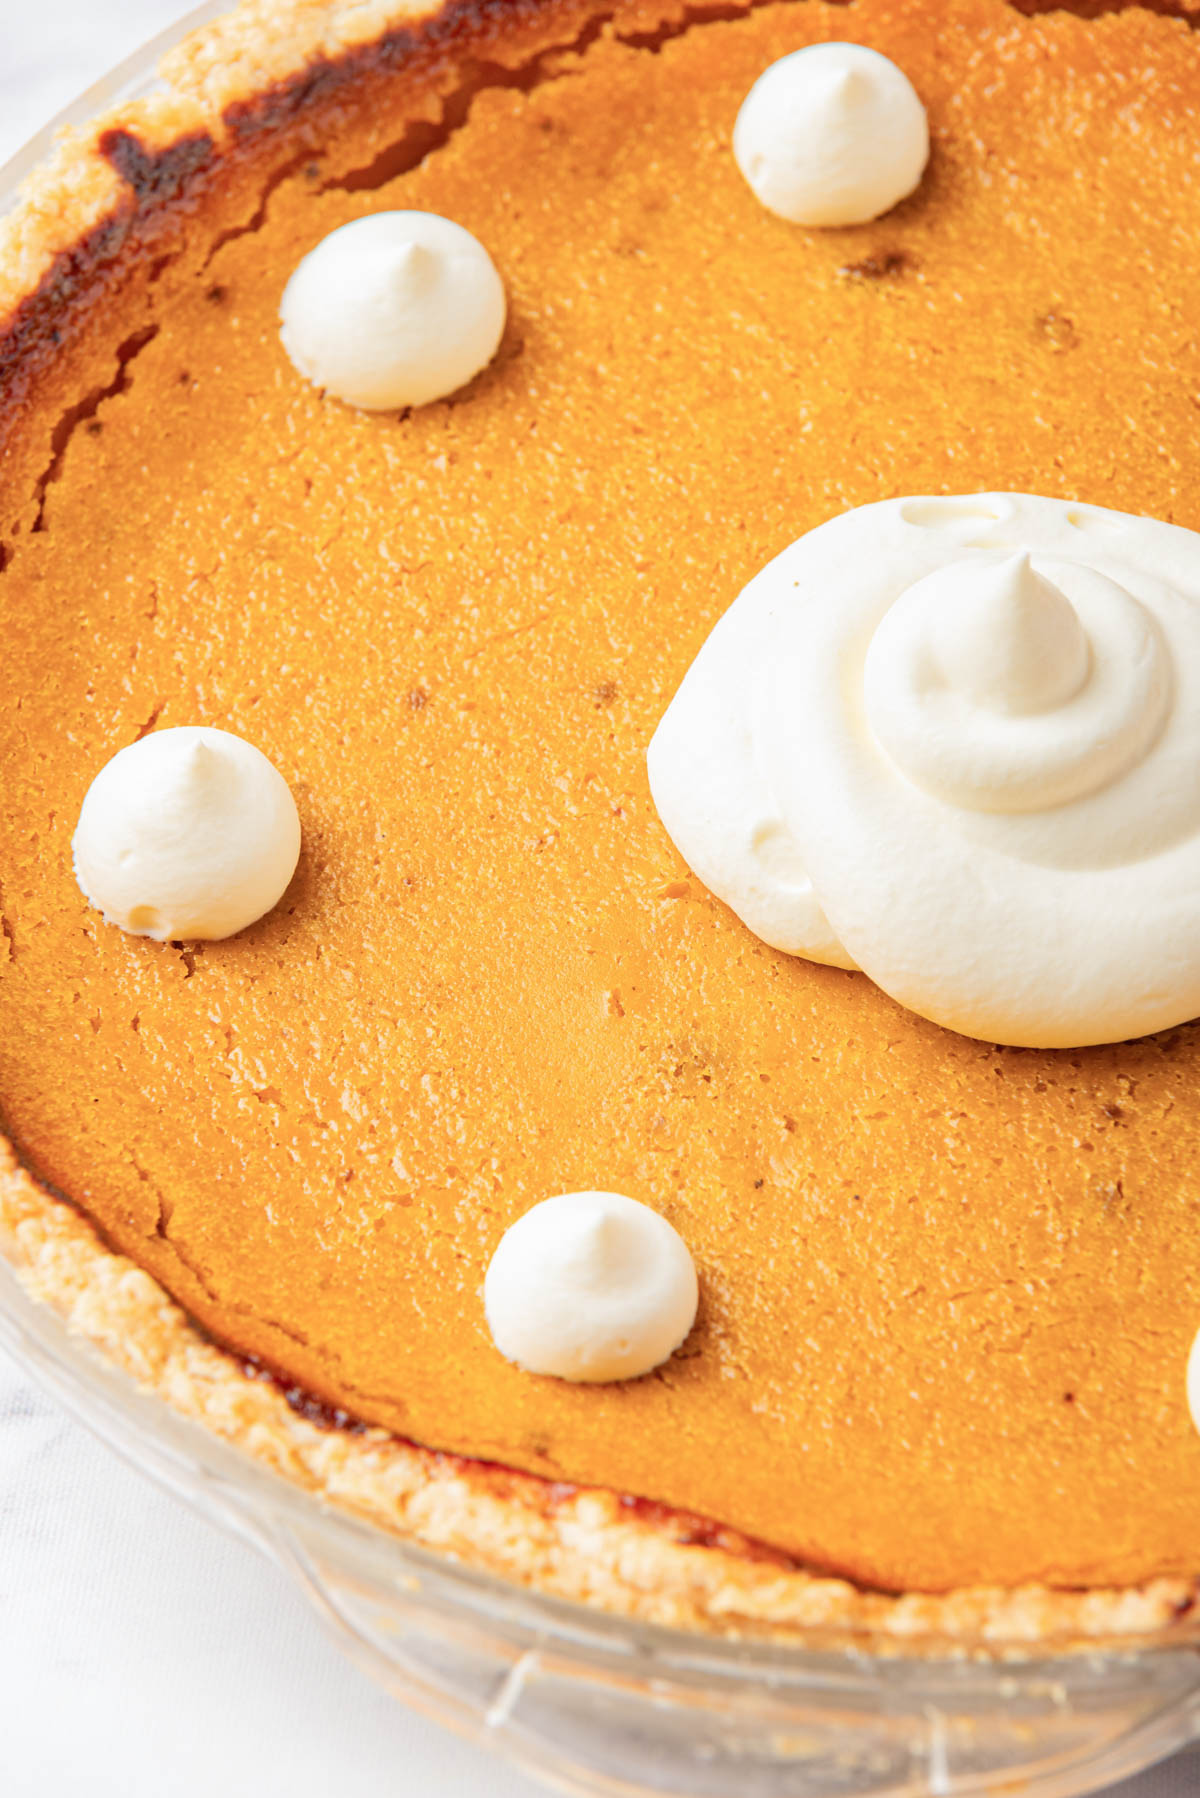 An overhead view of a whole pumpkin pie, centered with a large swirl of whipped cream and surrounded by smaller dollops, with a golden-brown crust.